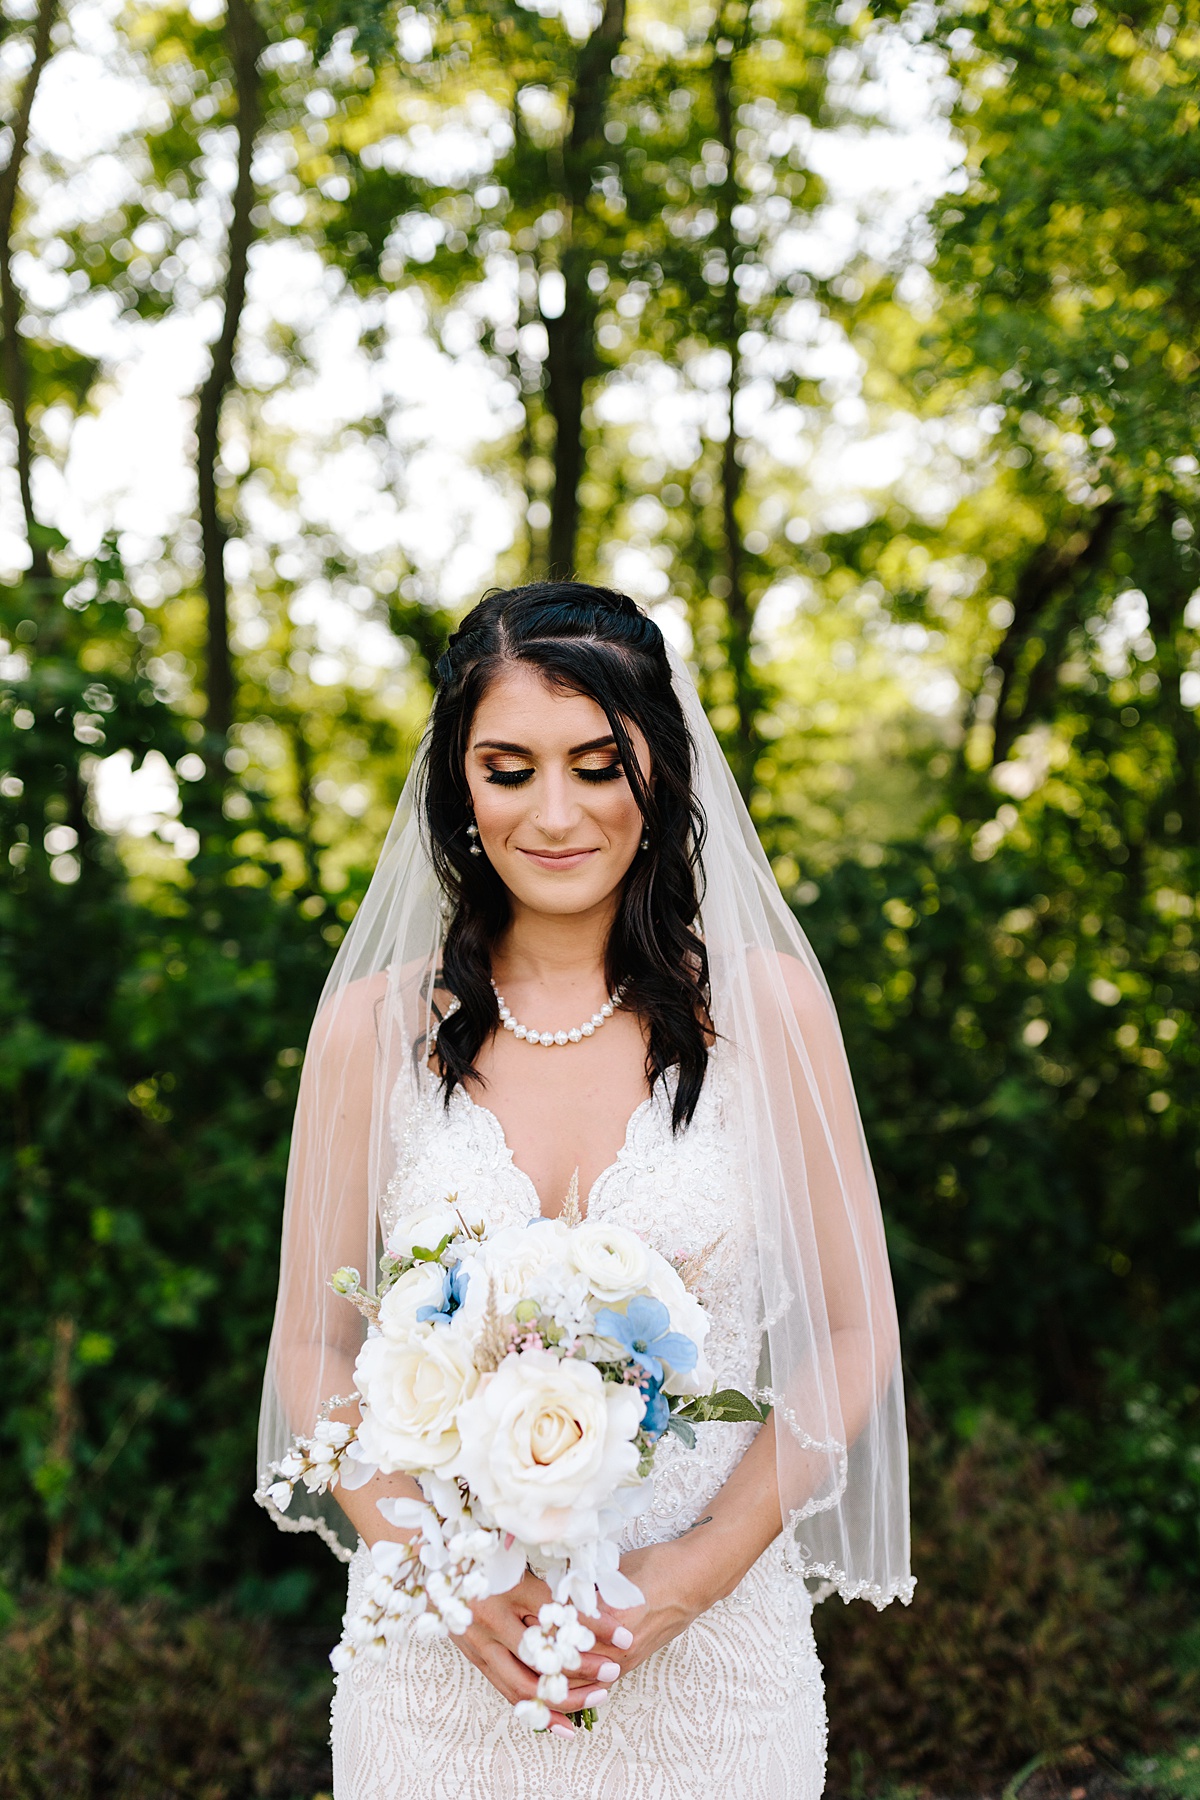 Brides Share Their Wedding Advice, wedding planning, how to plan your wedding, what brides say, wedding planning tips, kansas city wedding, wedding planning advice, traditional bride, must have wedding photos, blue and white wedding flowers, pearl necklace, beaded veil